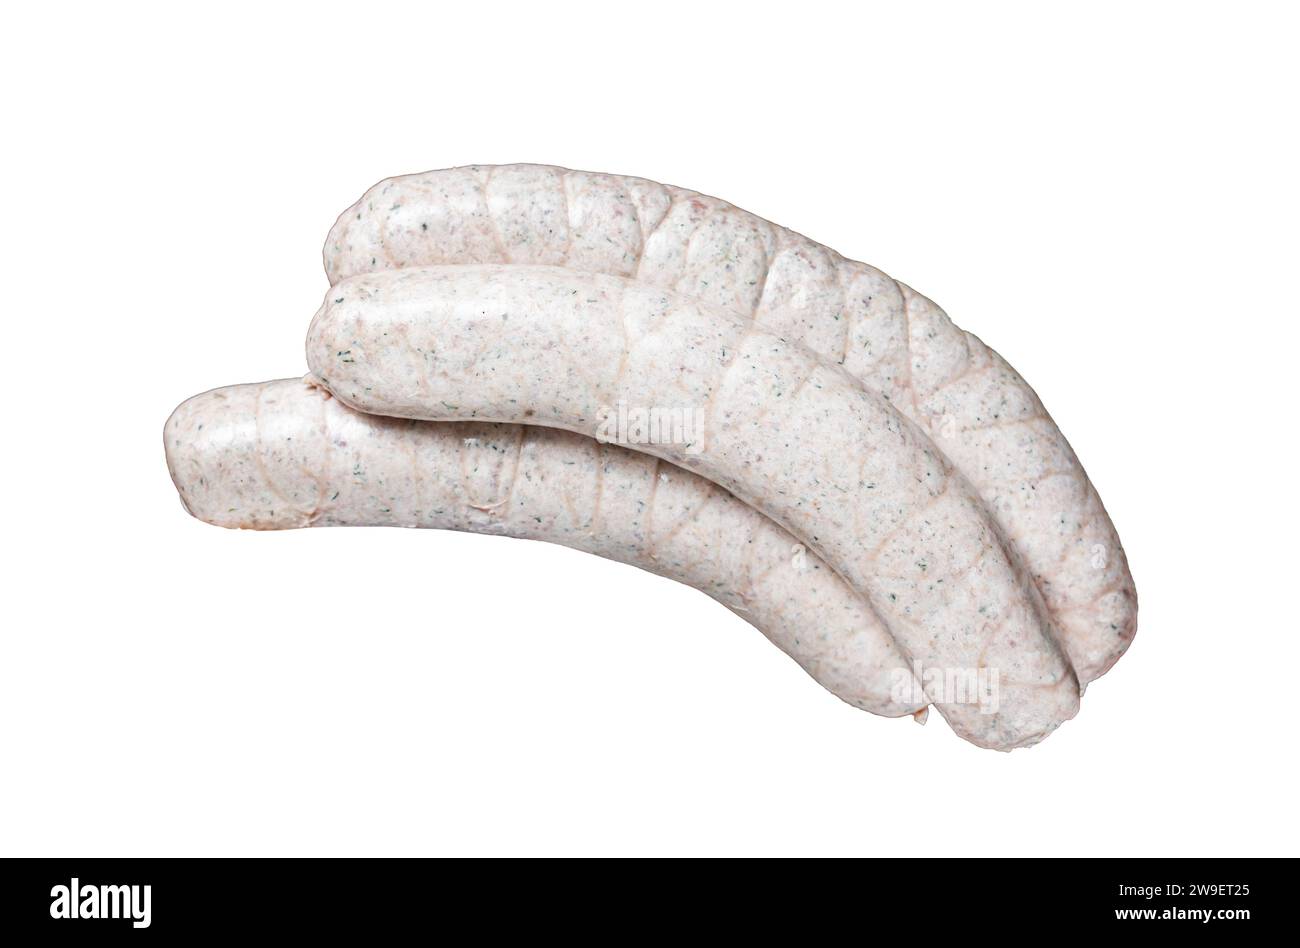 Munich traditional white sausages Isolated on white background, top view Stock Photo